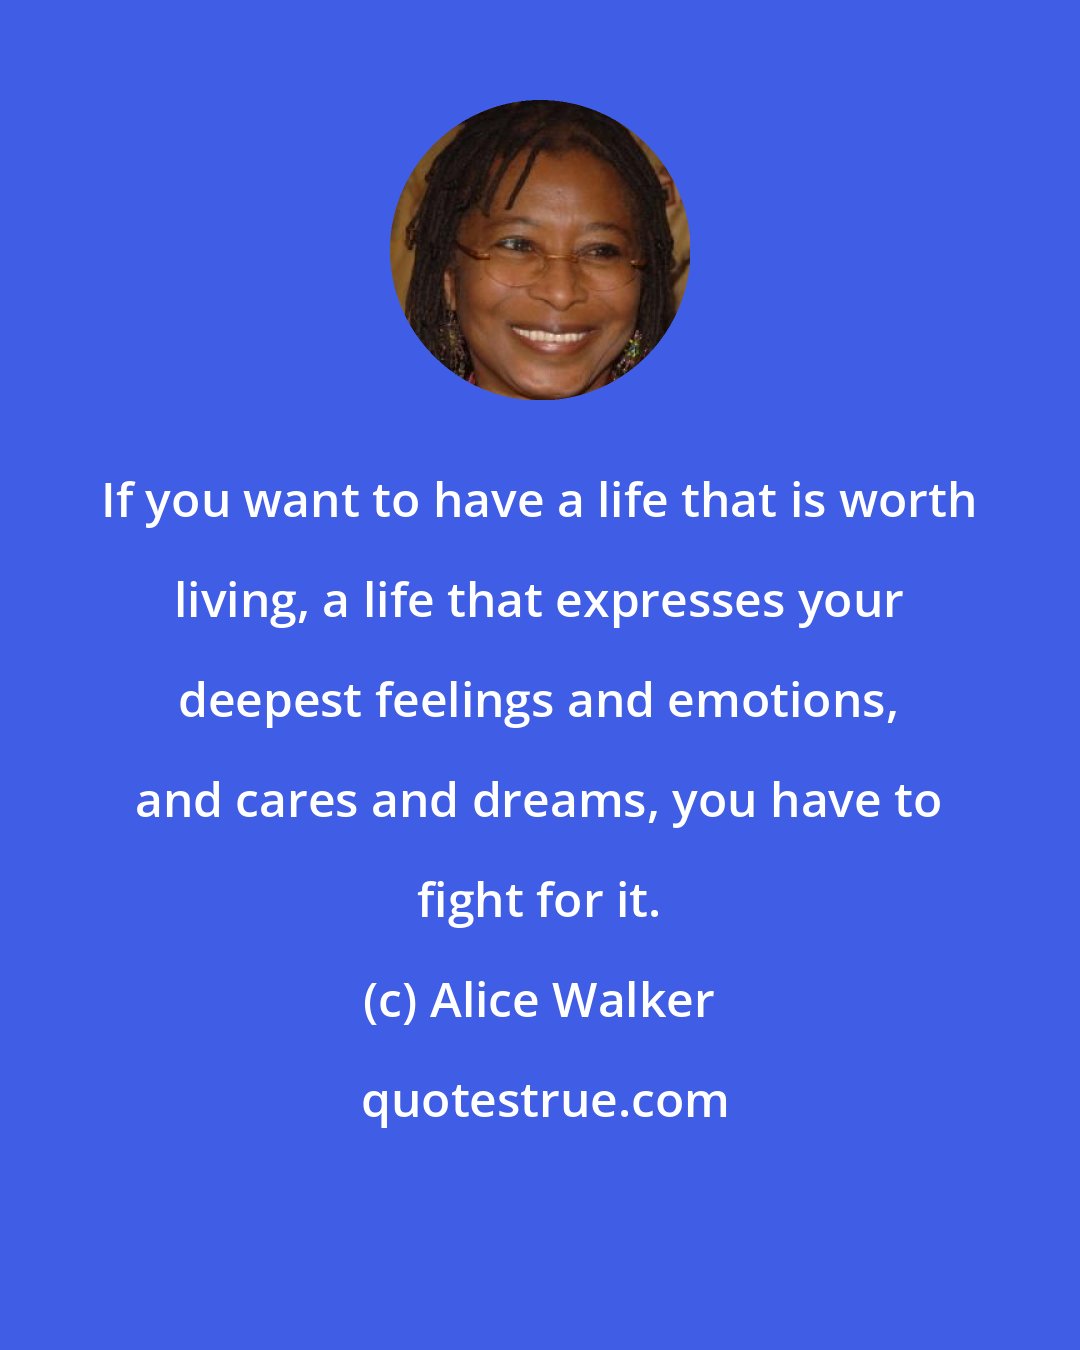 Alice Walker: If you want to have a life that is worth living, a life that expresses your deepest feelings and emotions, and cares and dreams, you have to fight for it.